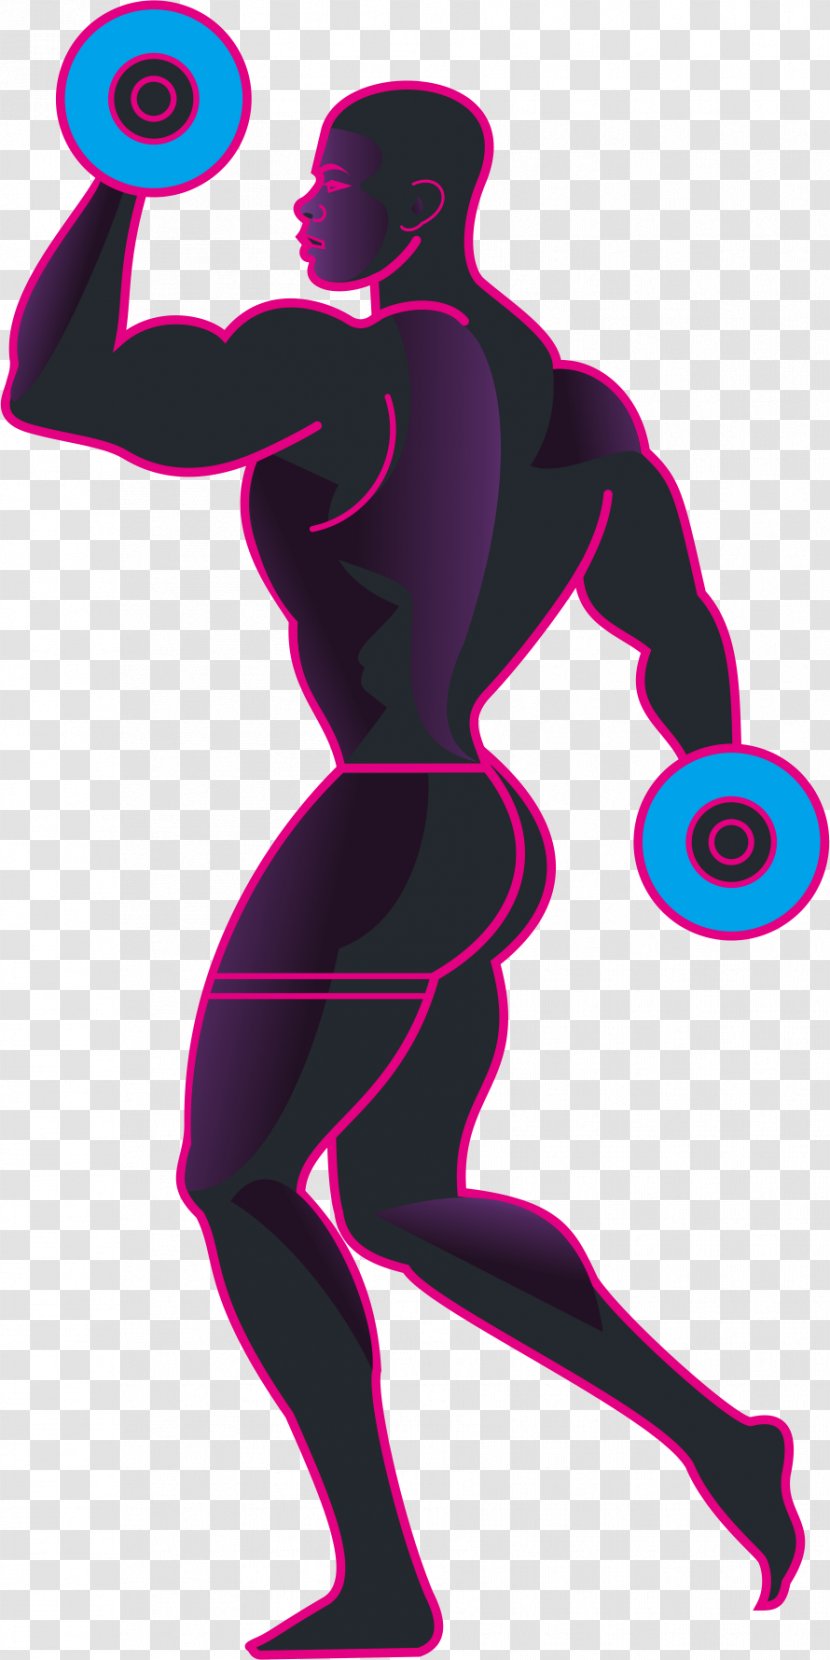 Olympic Weightlifting Weight Training Silhouette Physical Exercise - Tree - Men's Fitness Transparent PNG